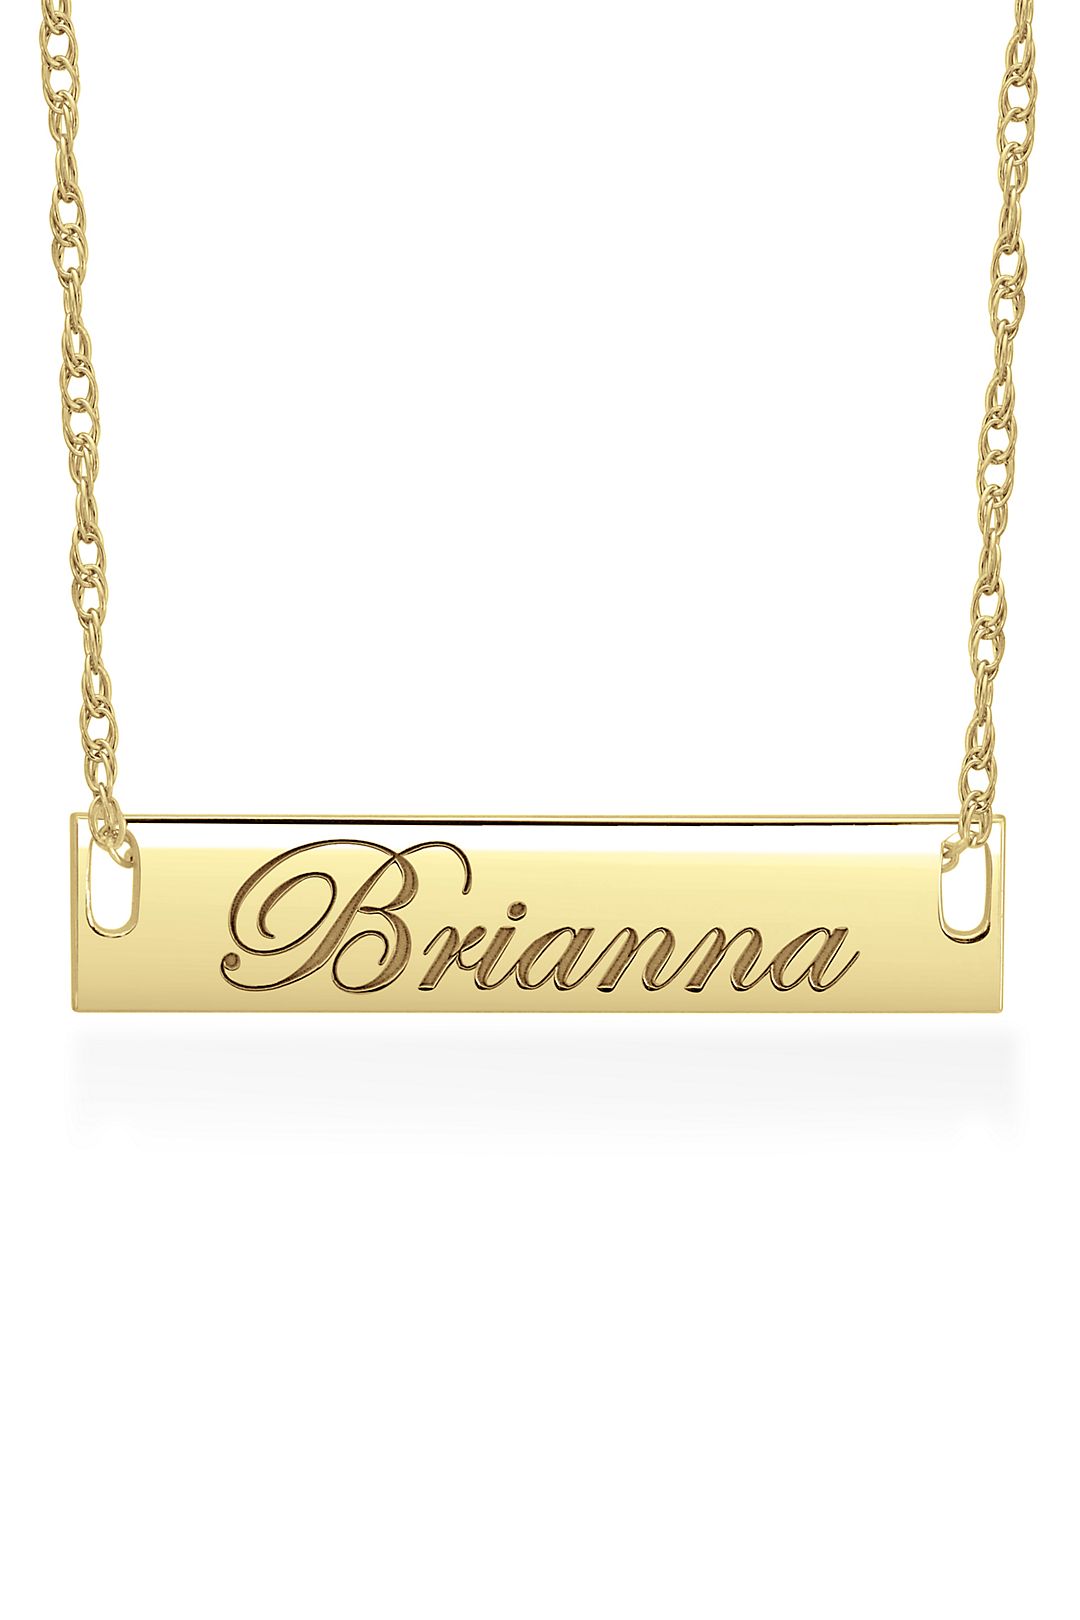 Personalized Bar Necklace with Script Lettering Image 4